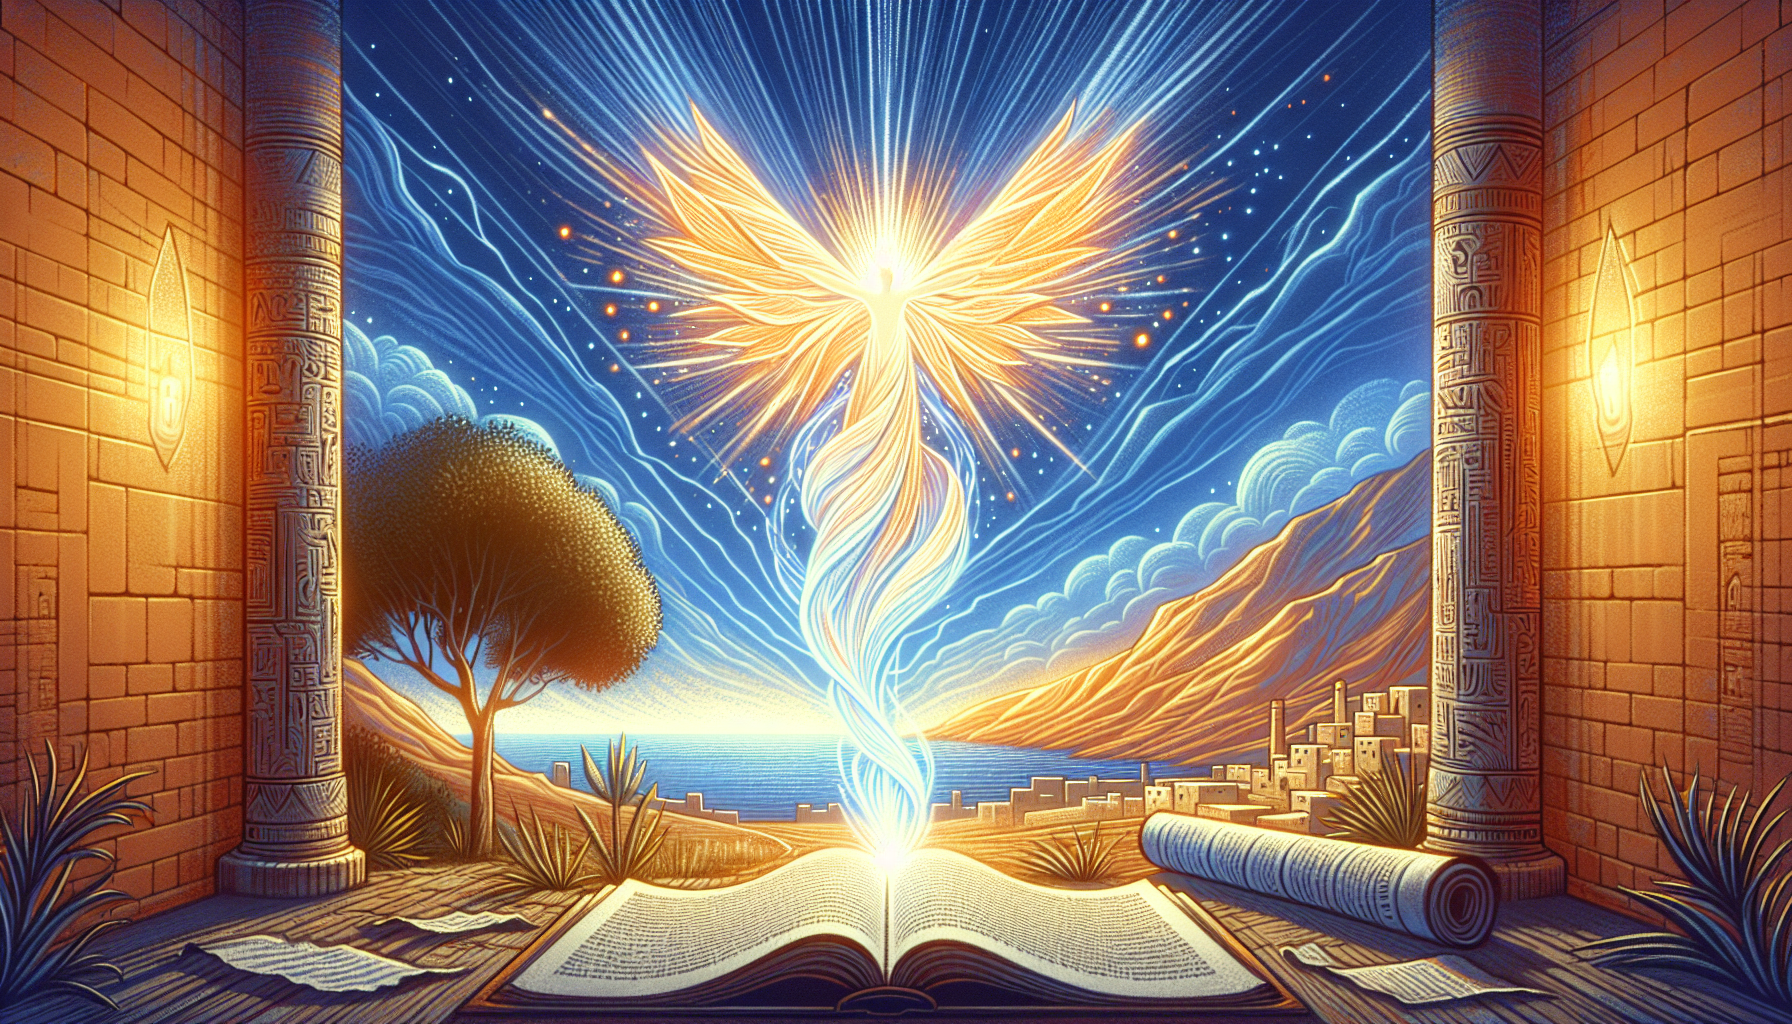 Visual interpretation of Biblical passage John 1:3-11, depicting the creation of light and life by the Word, with ethereal light emanating from an ancient scroll in a tranquil, ancient Middle Eastern